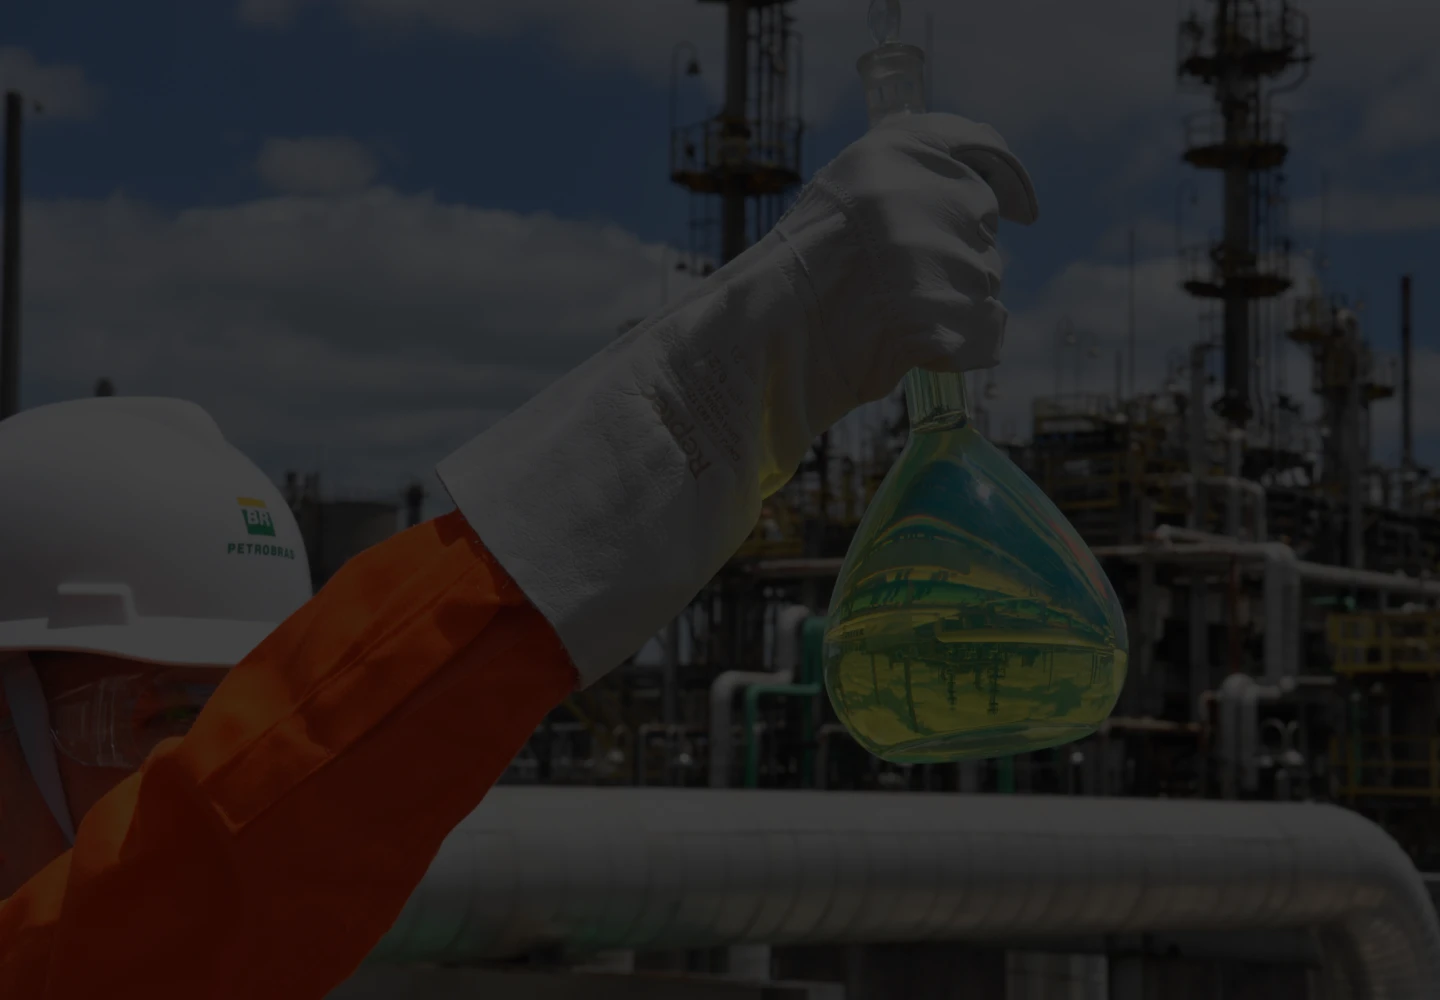 Photo of a Petrobras employee holding a glass with fuel inside, in front of a refinery.